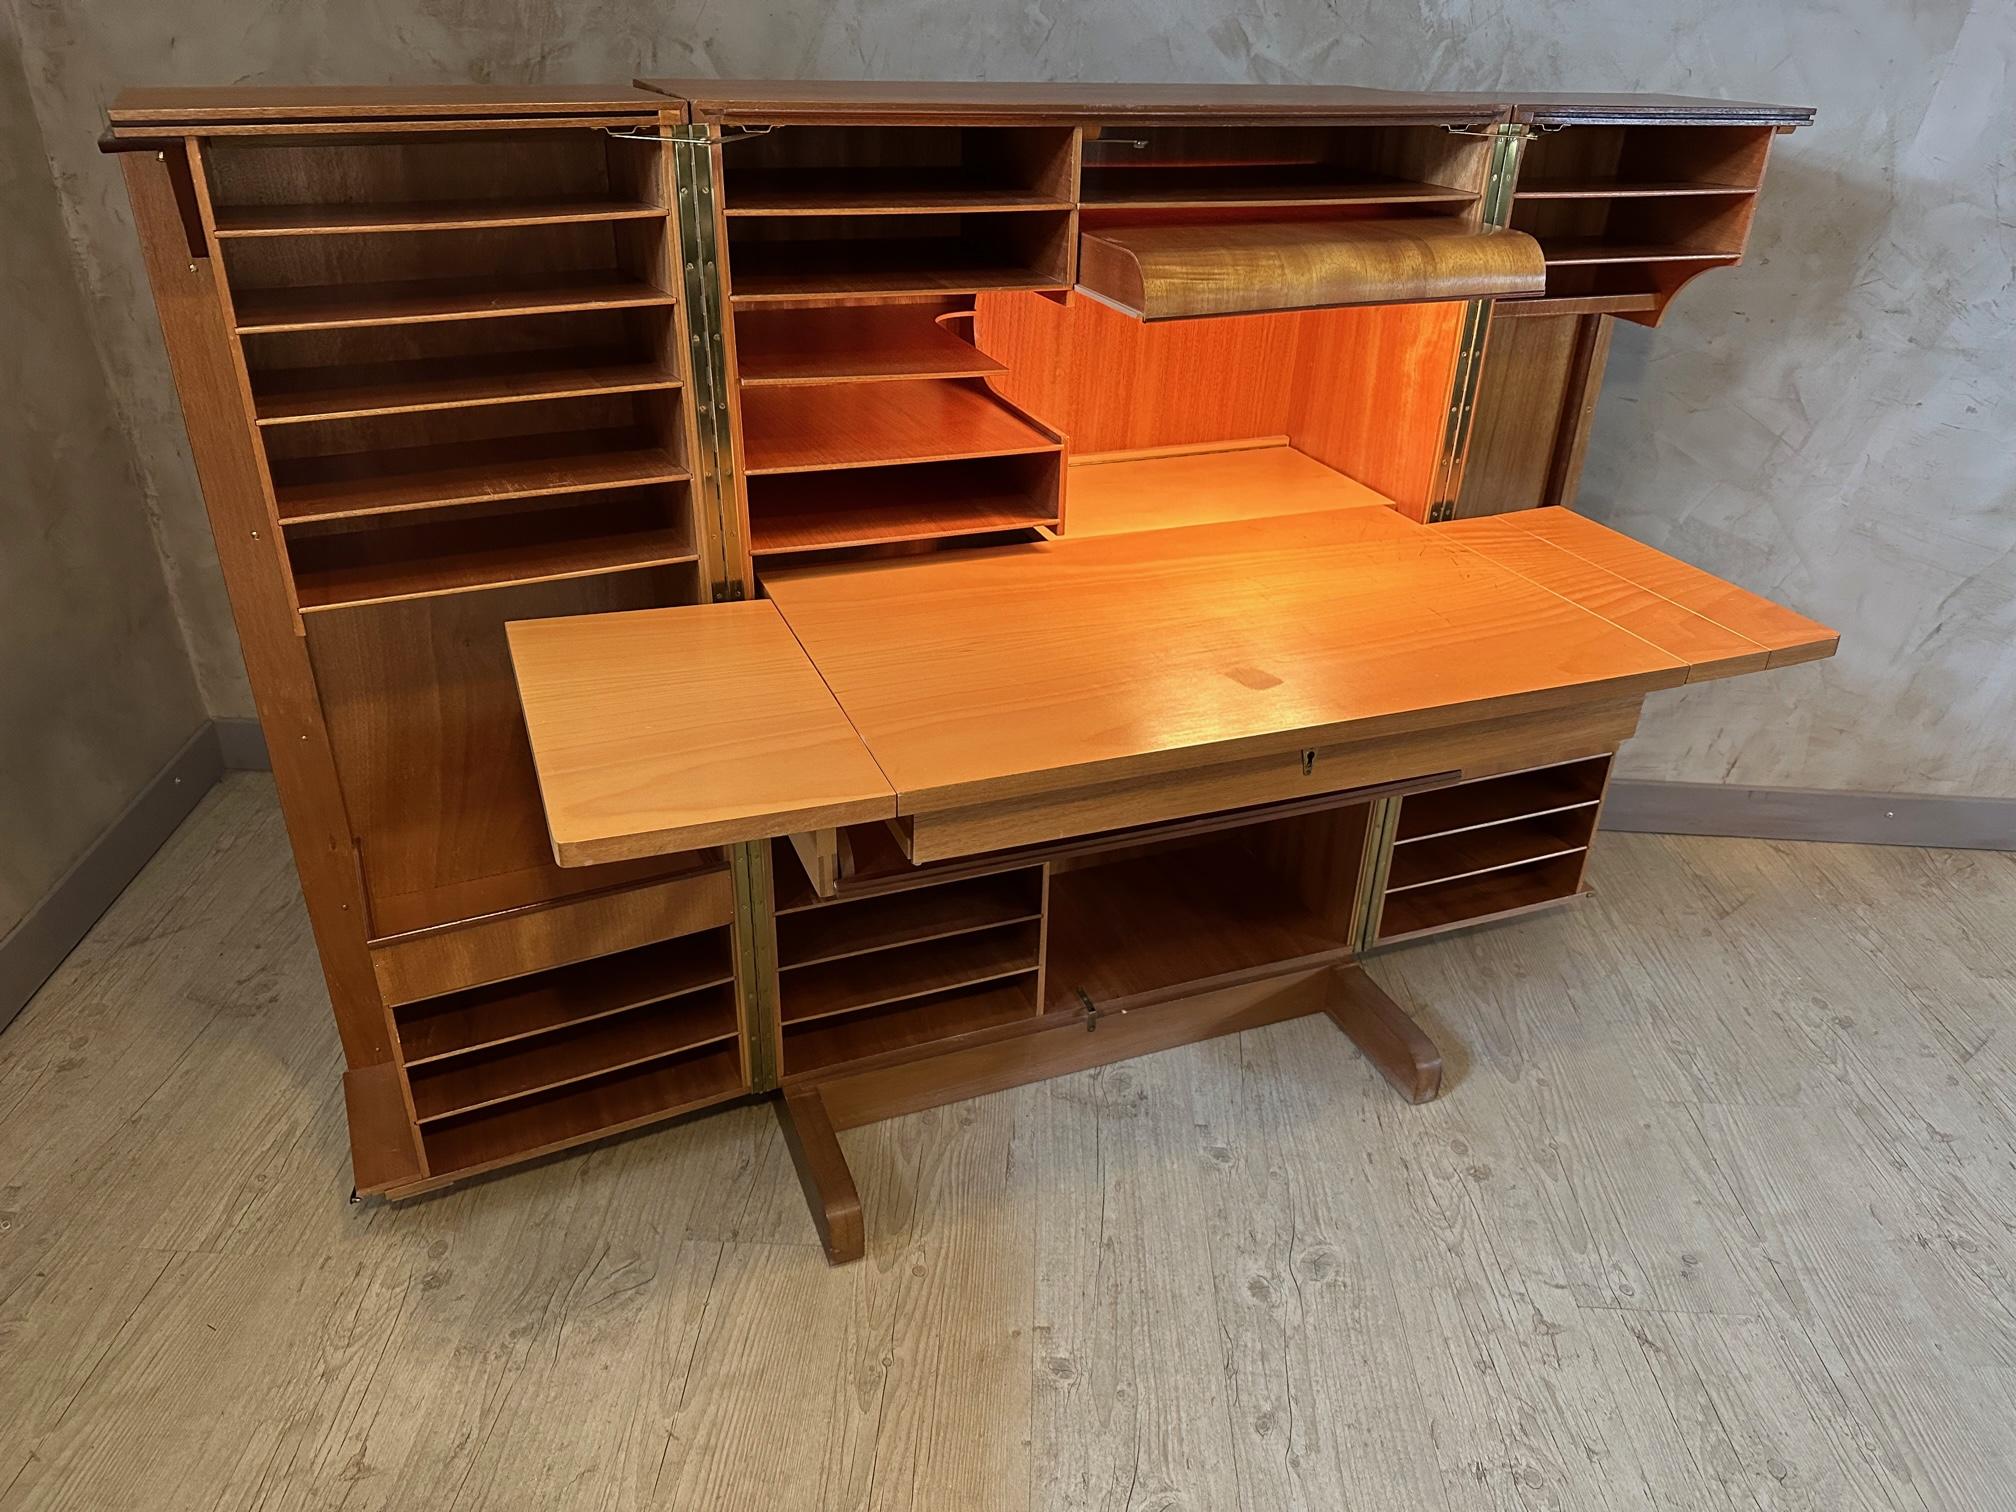 Exceptional vintage desk known as the 